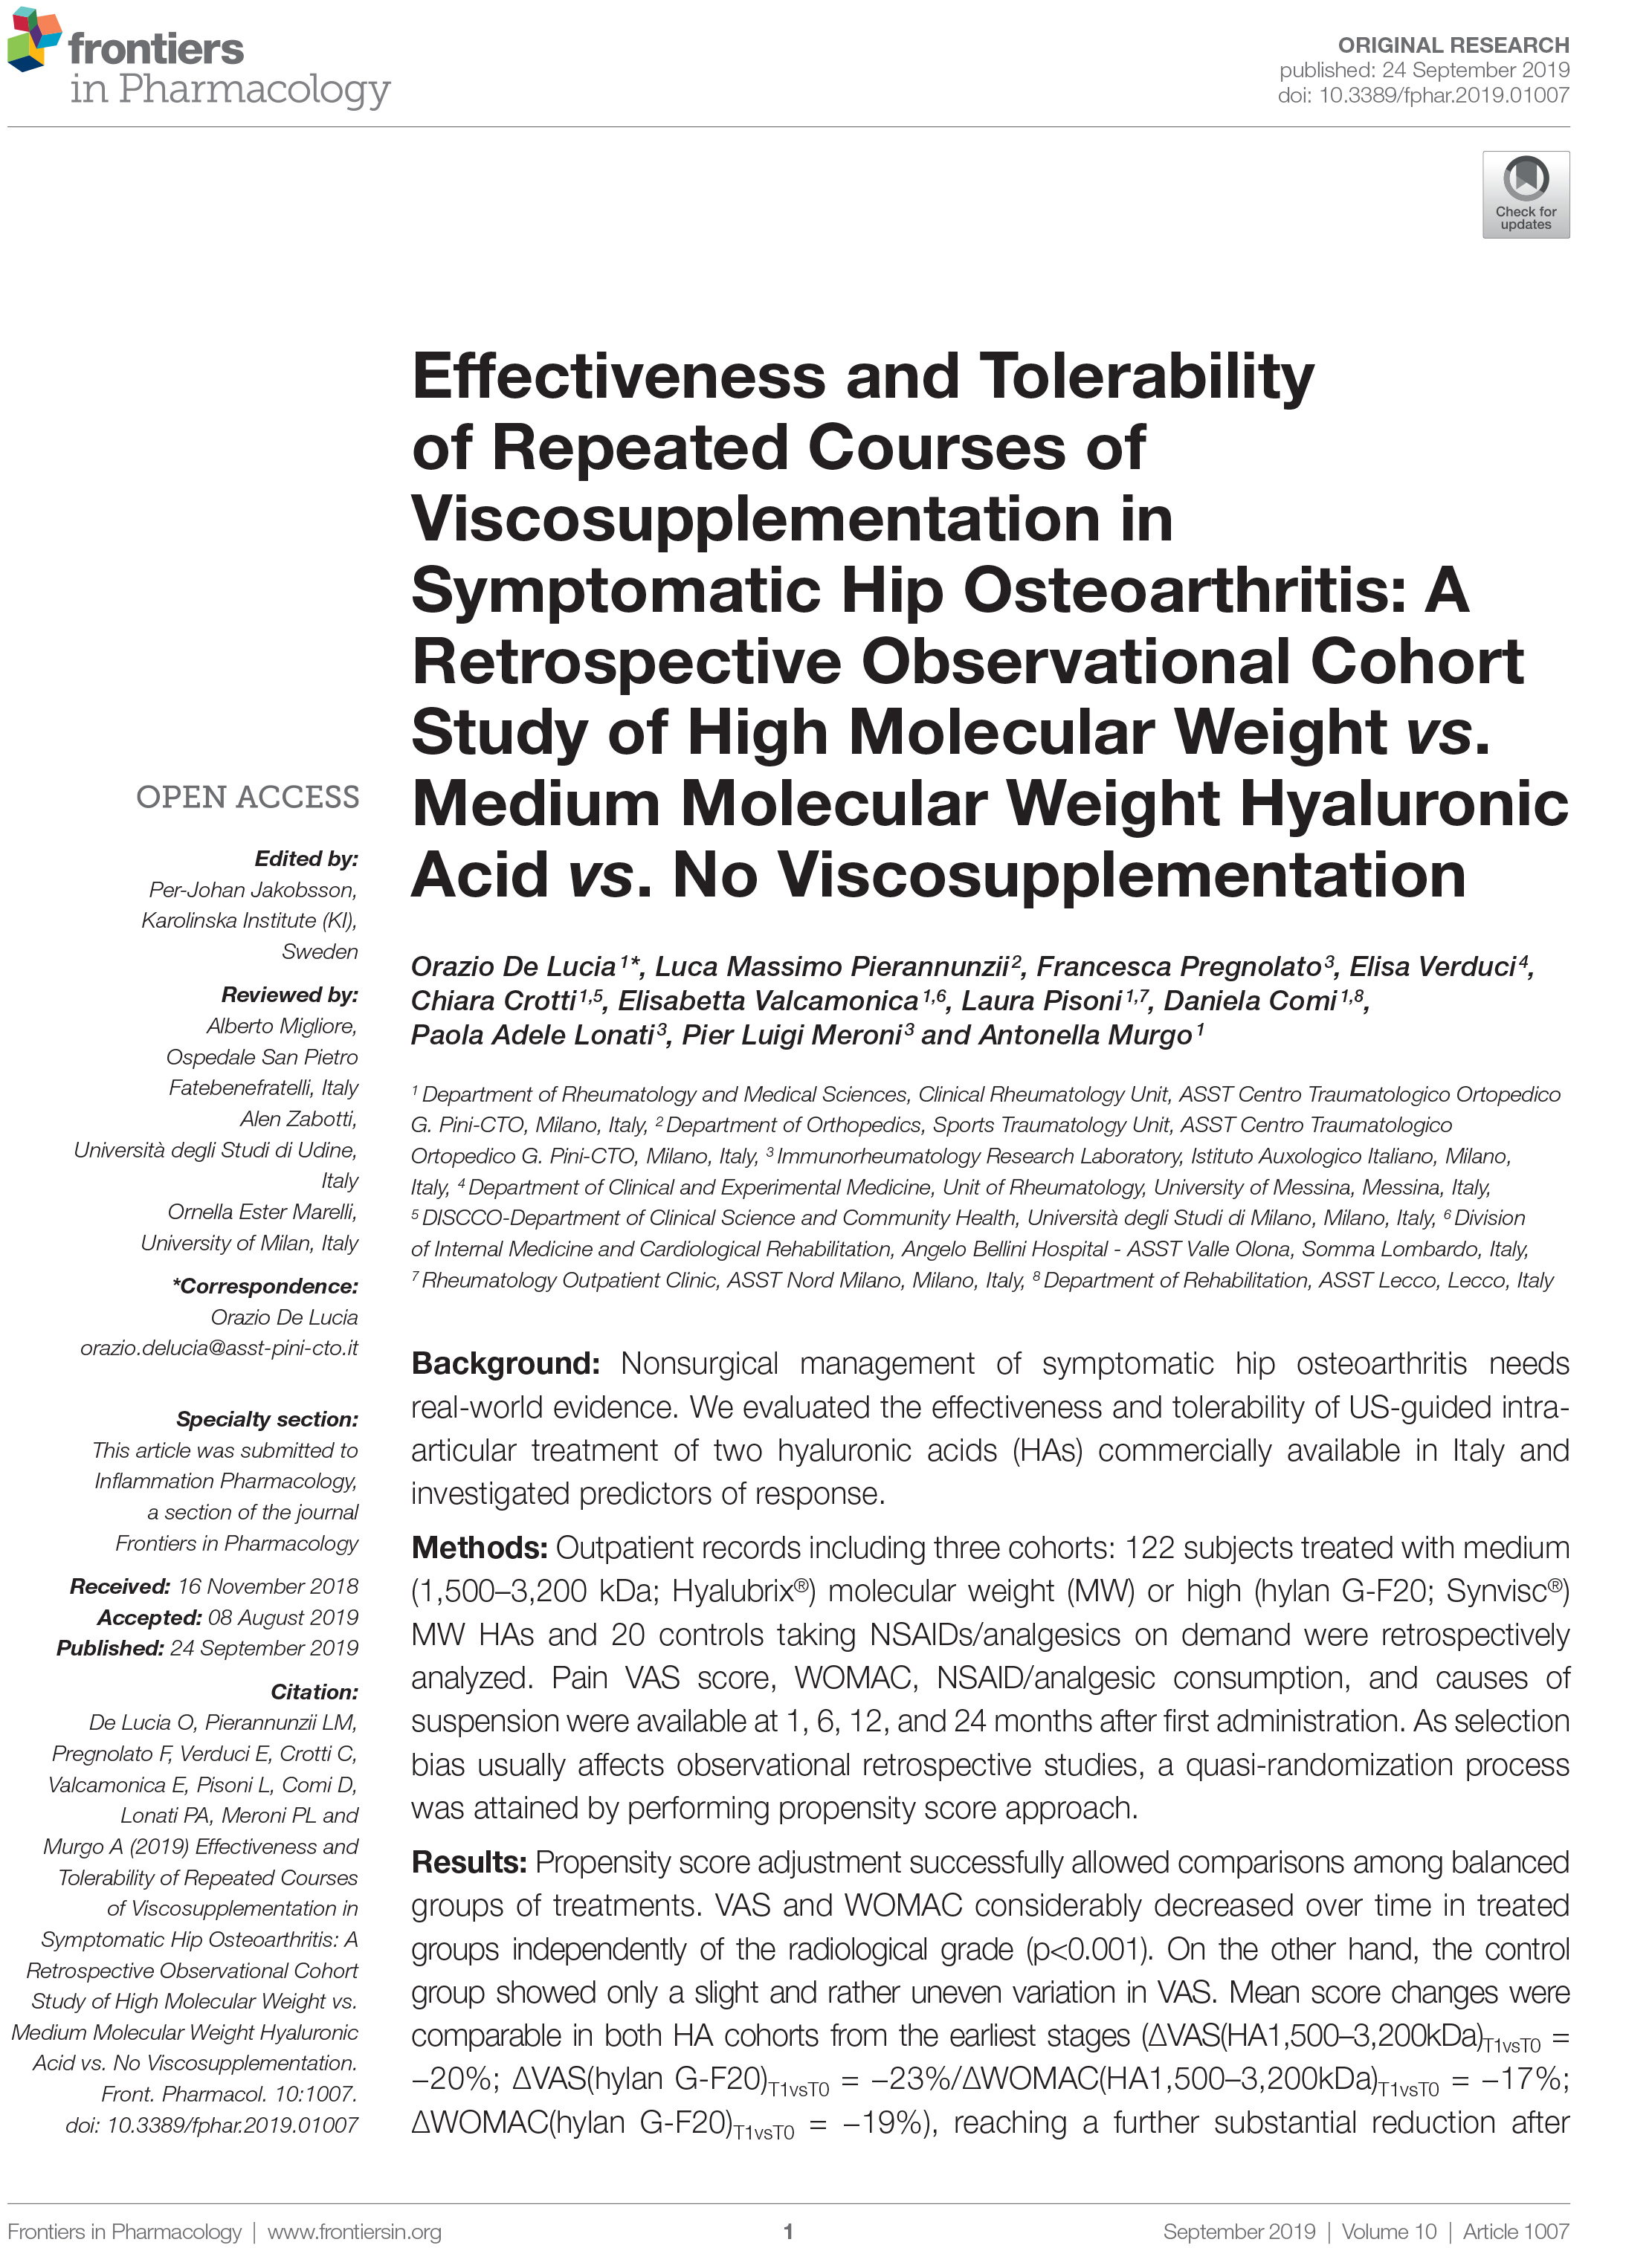 Effectivenesstolerability_of_repeated_courses_of_viscosupplementation_in_symptomatic_hip-1.jpg